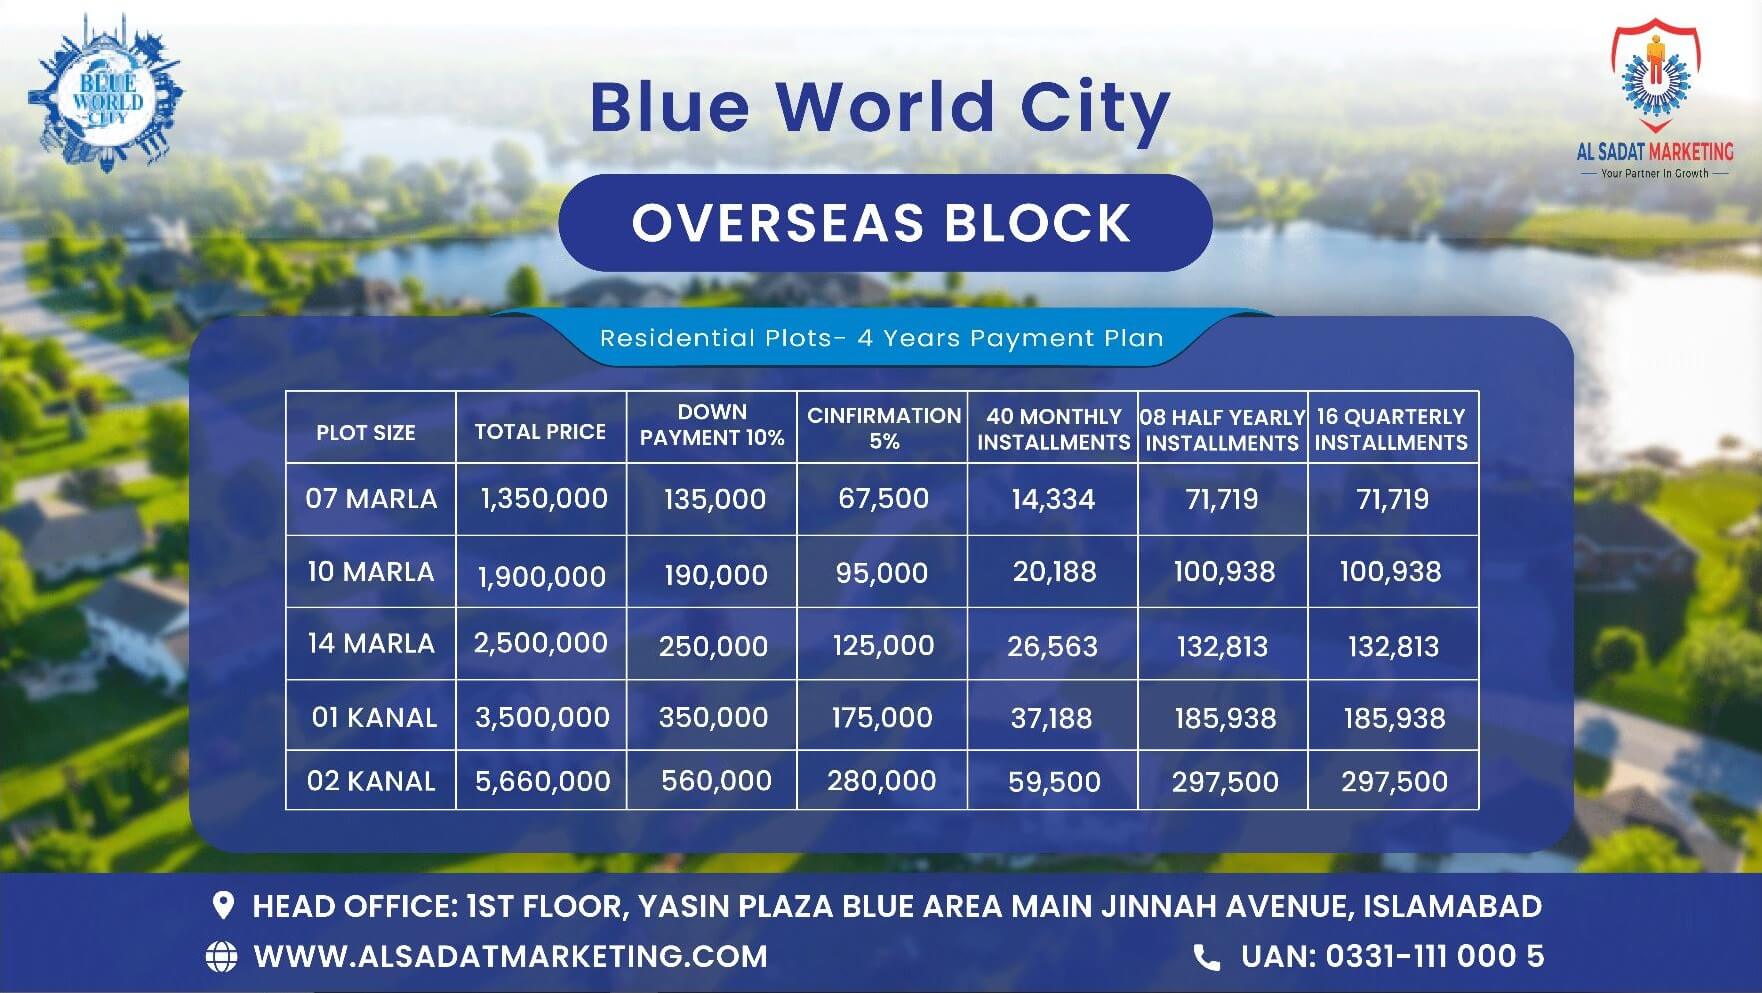 blue world city overseas block residential plots old payment plan – blue world city islamabad overseas block residential plots old payment plan – blue world city rawalpindi overseas block residential plots old payment plan – blue world city overseas block payment plan – blue world city islamabad overseas block payment plan – blue world city rawalpindi overseas block payment plan – blue world city payment plan – blue world city islamabad payment plan - blue world city rawalpindi payment plan – blue world city– blue world city islamabad – blue world city rawalpindi– blue world city housing society – blue world city islamabad housing society – blue world city real estate project – blue world city islamabad real estate project - al sadat marketing - alsadat marketing - al-sadat marketing